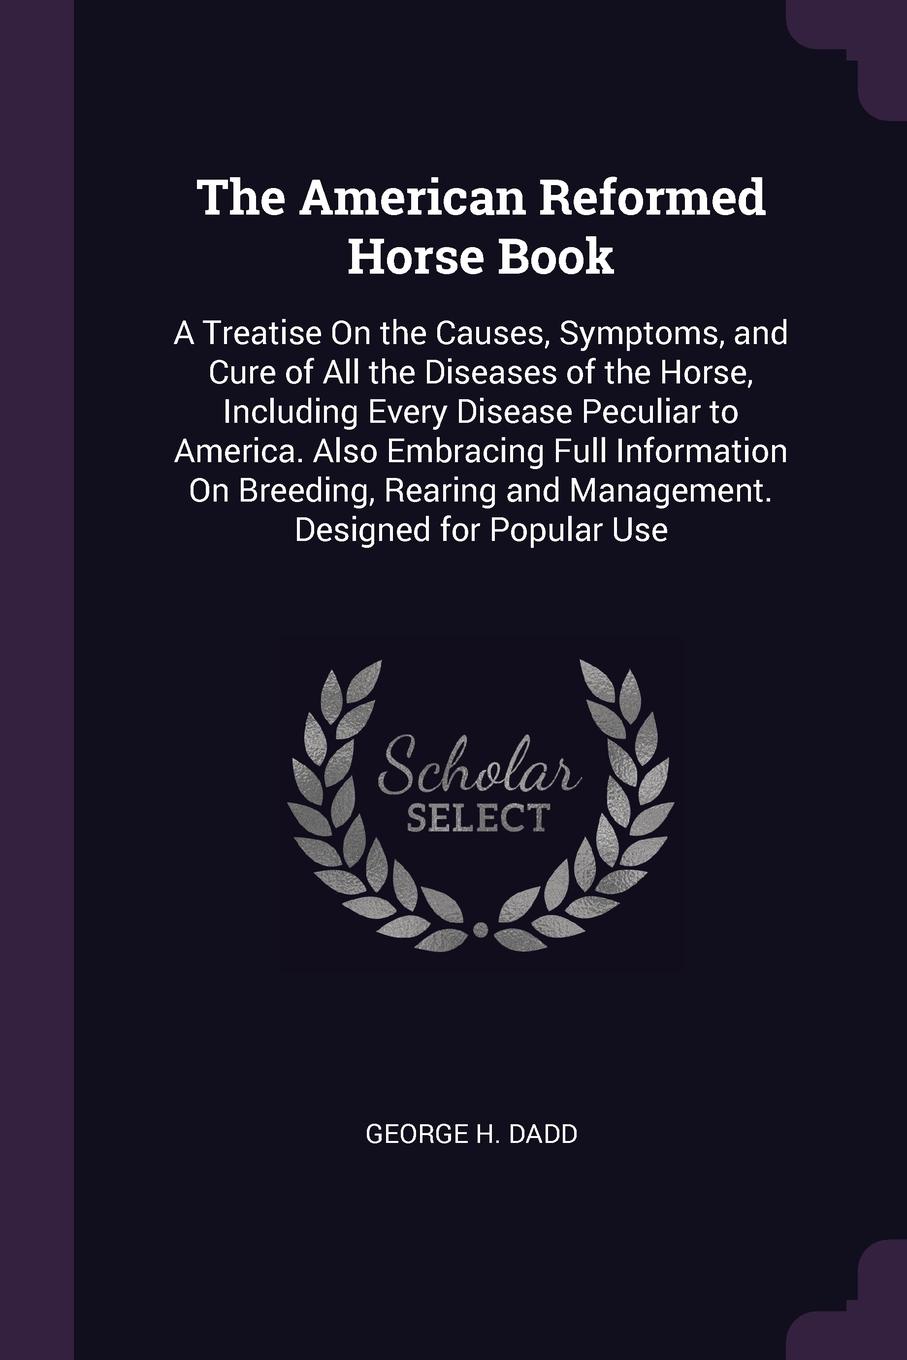 The American Reformed Horse Book. A Treatise On the Causes, Symptoms, and Cure of All the Diseases of the Horse, Including Every Disease Peculiar to America. Also Embracing Full Information On Breeding, Rearing and Management. Designed for Popular...